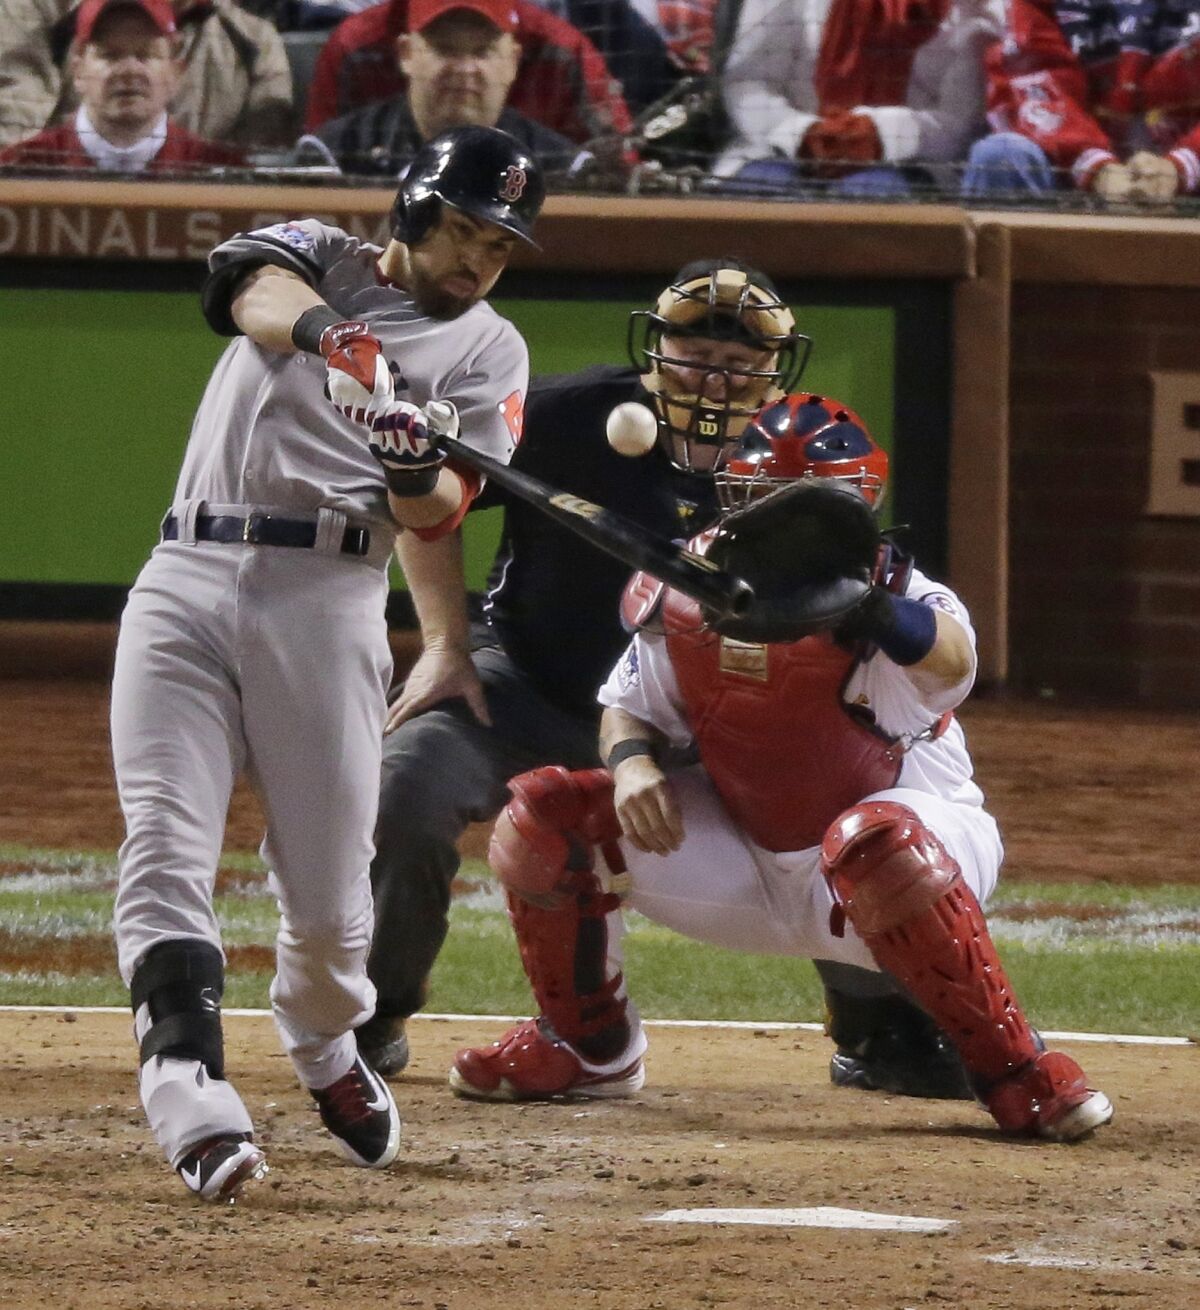 Boston's Jacoby Ellsbury hits a run-scoring single during the seventh inning of a 3-1 win over St. Louis in Game 5 of the World Series on Monday.